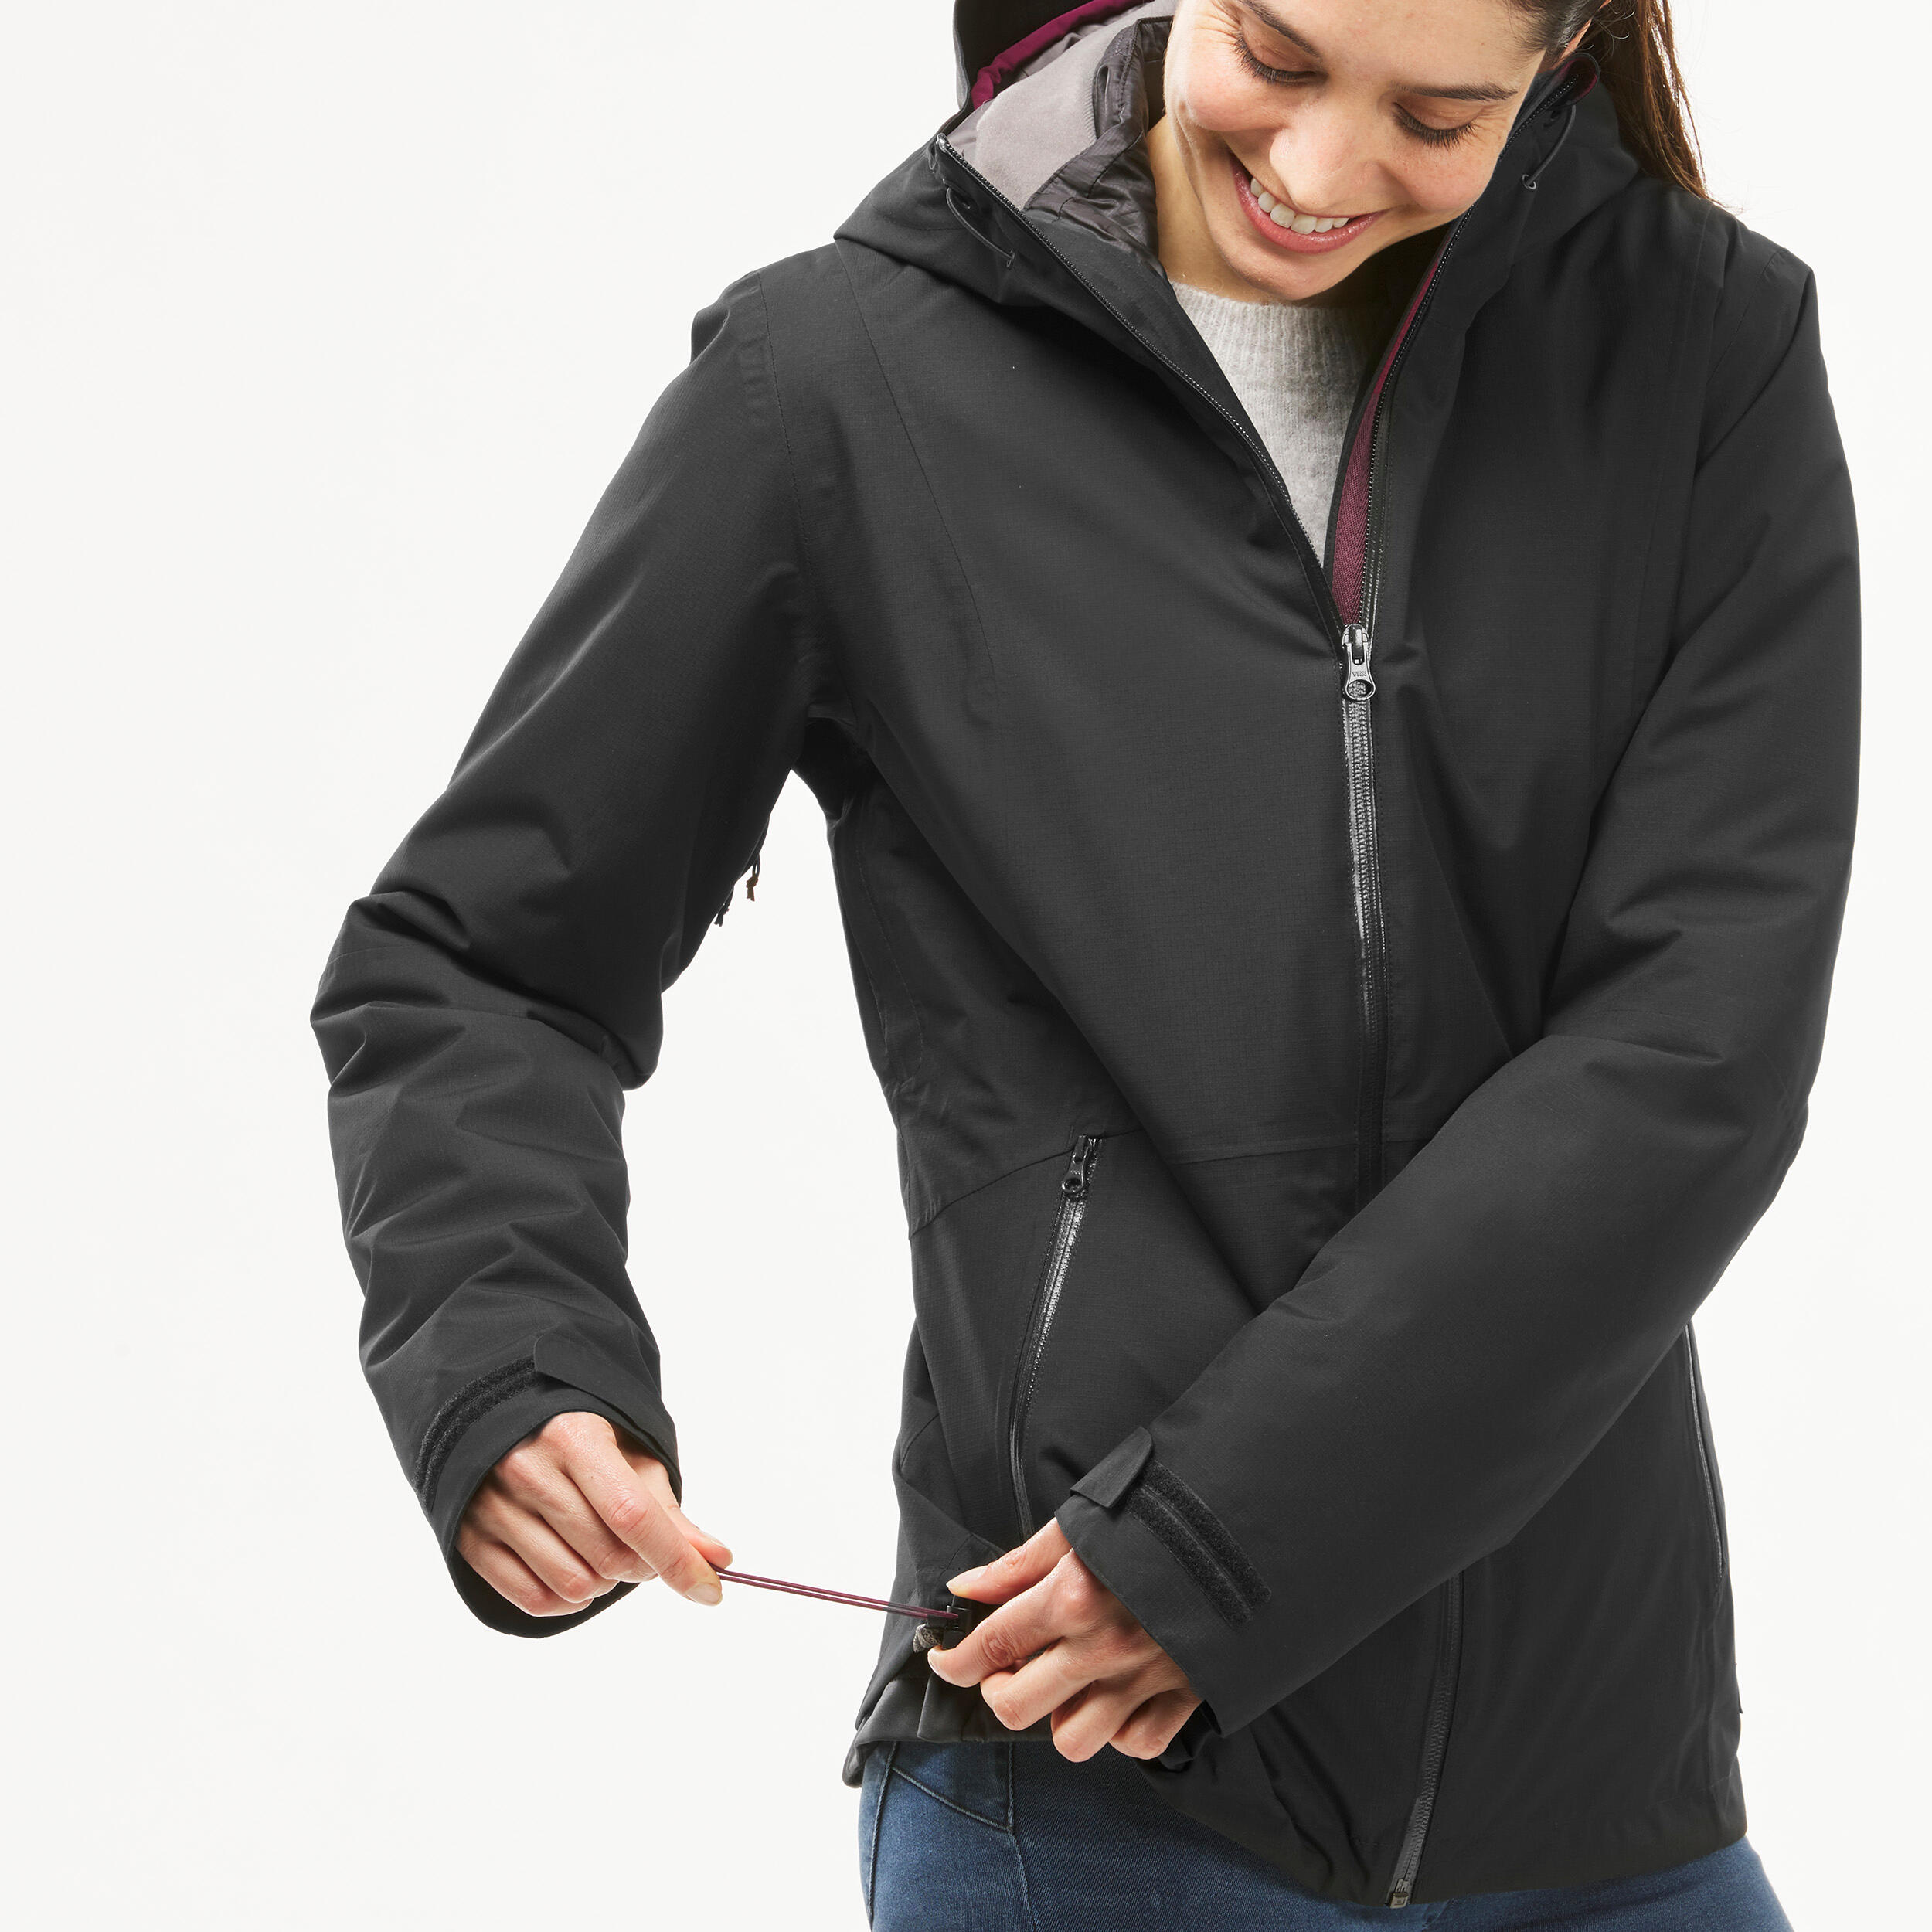 Women's Travel Jacket: The Antipodes Reversible Travel Coat - Anywhere  Apparel